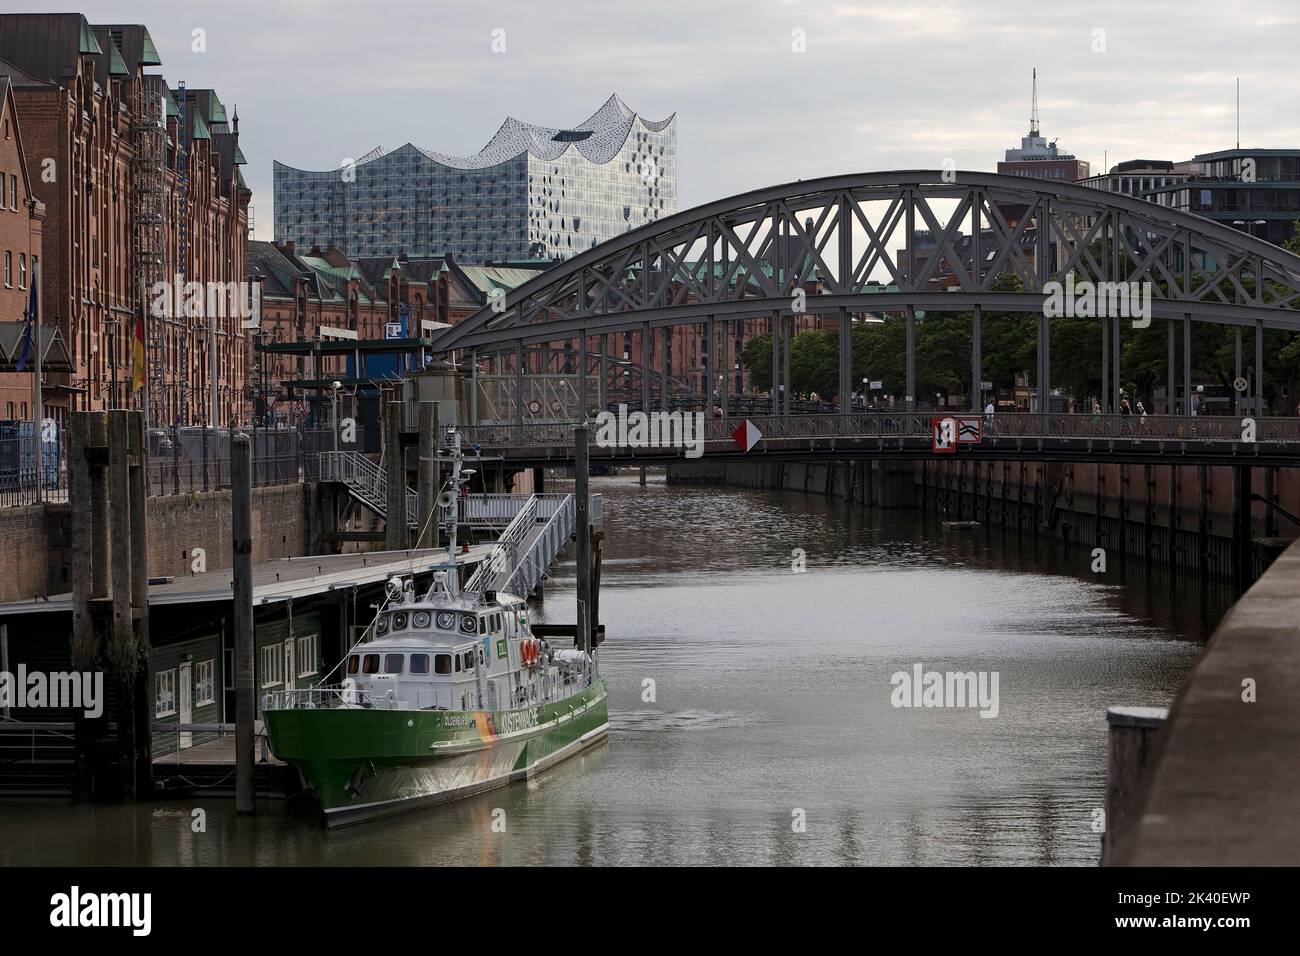 customs canal with the ship of the Customs Museum on the granary bridge and the Elbphilarmonie, Germany, Hamburg Stock Photo